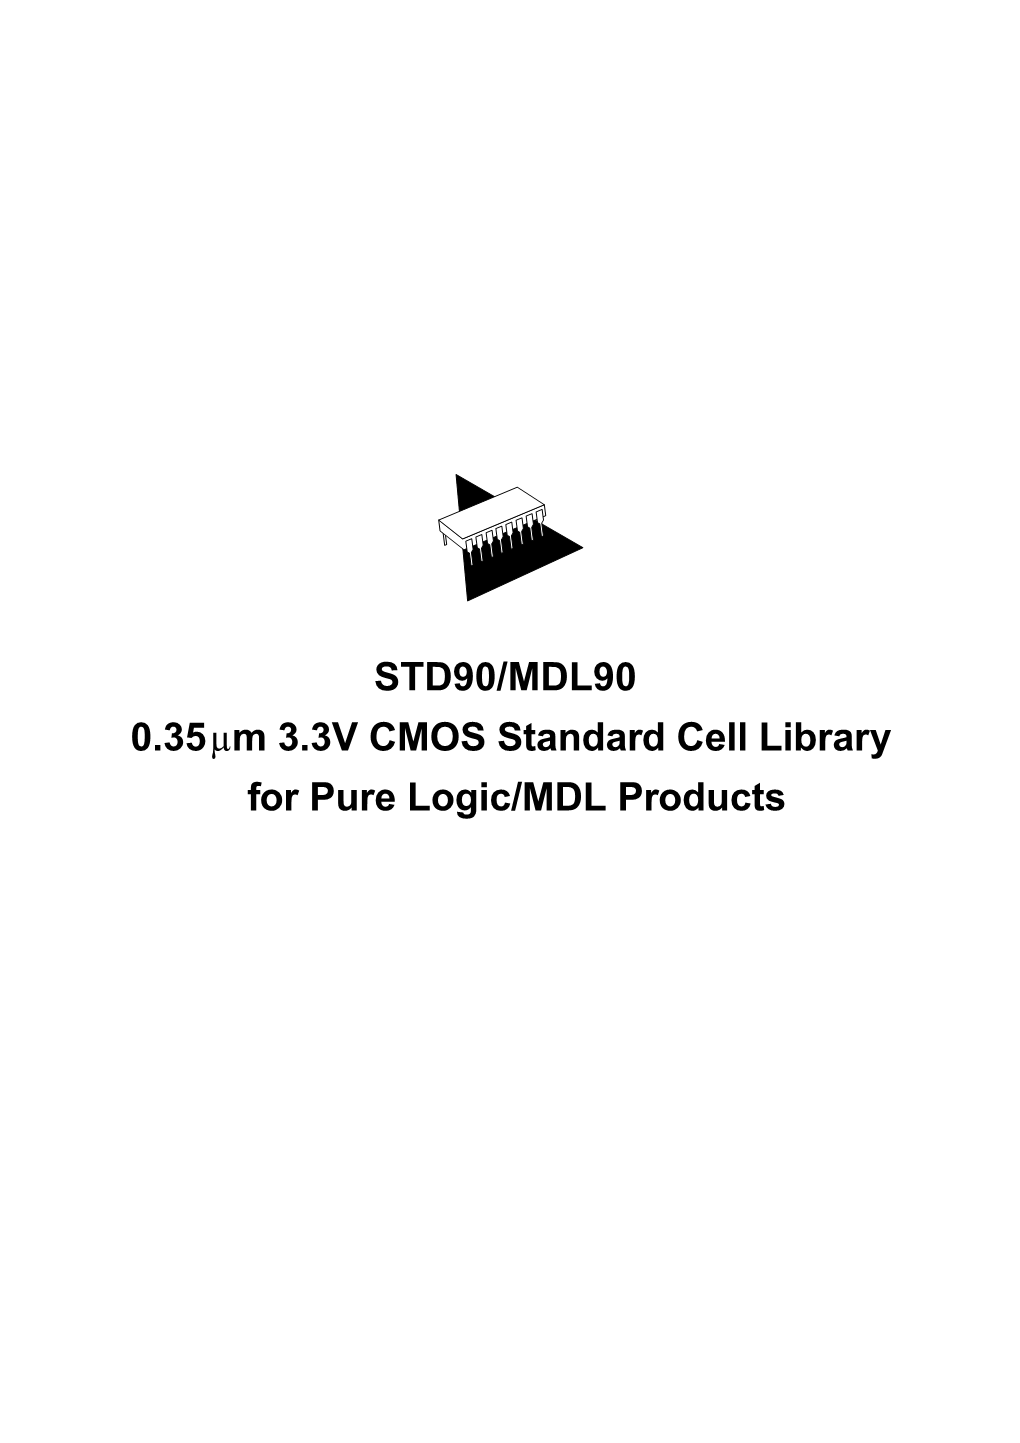 STD90/MDL90 for Pure Logic/MDL Products 0.35Μm 3.3V CMOS